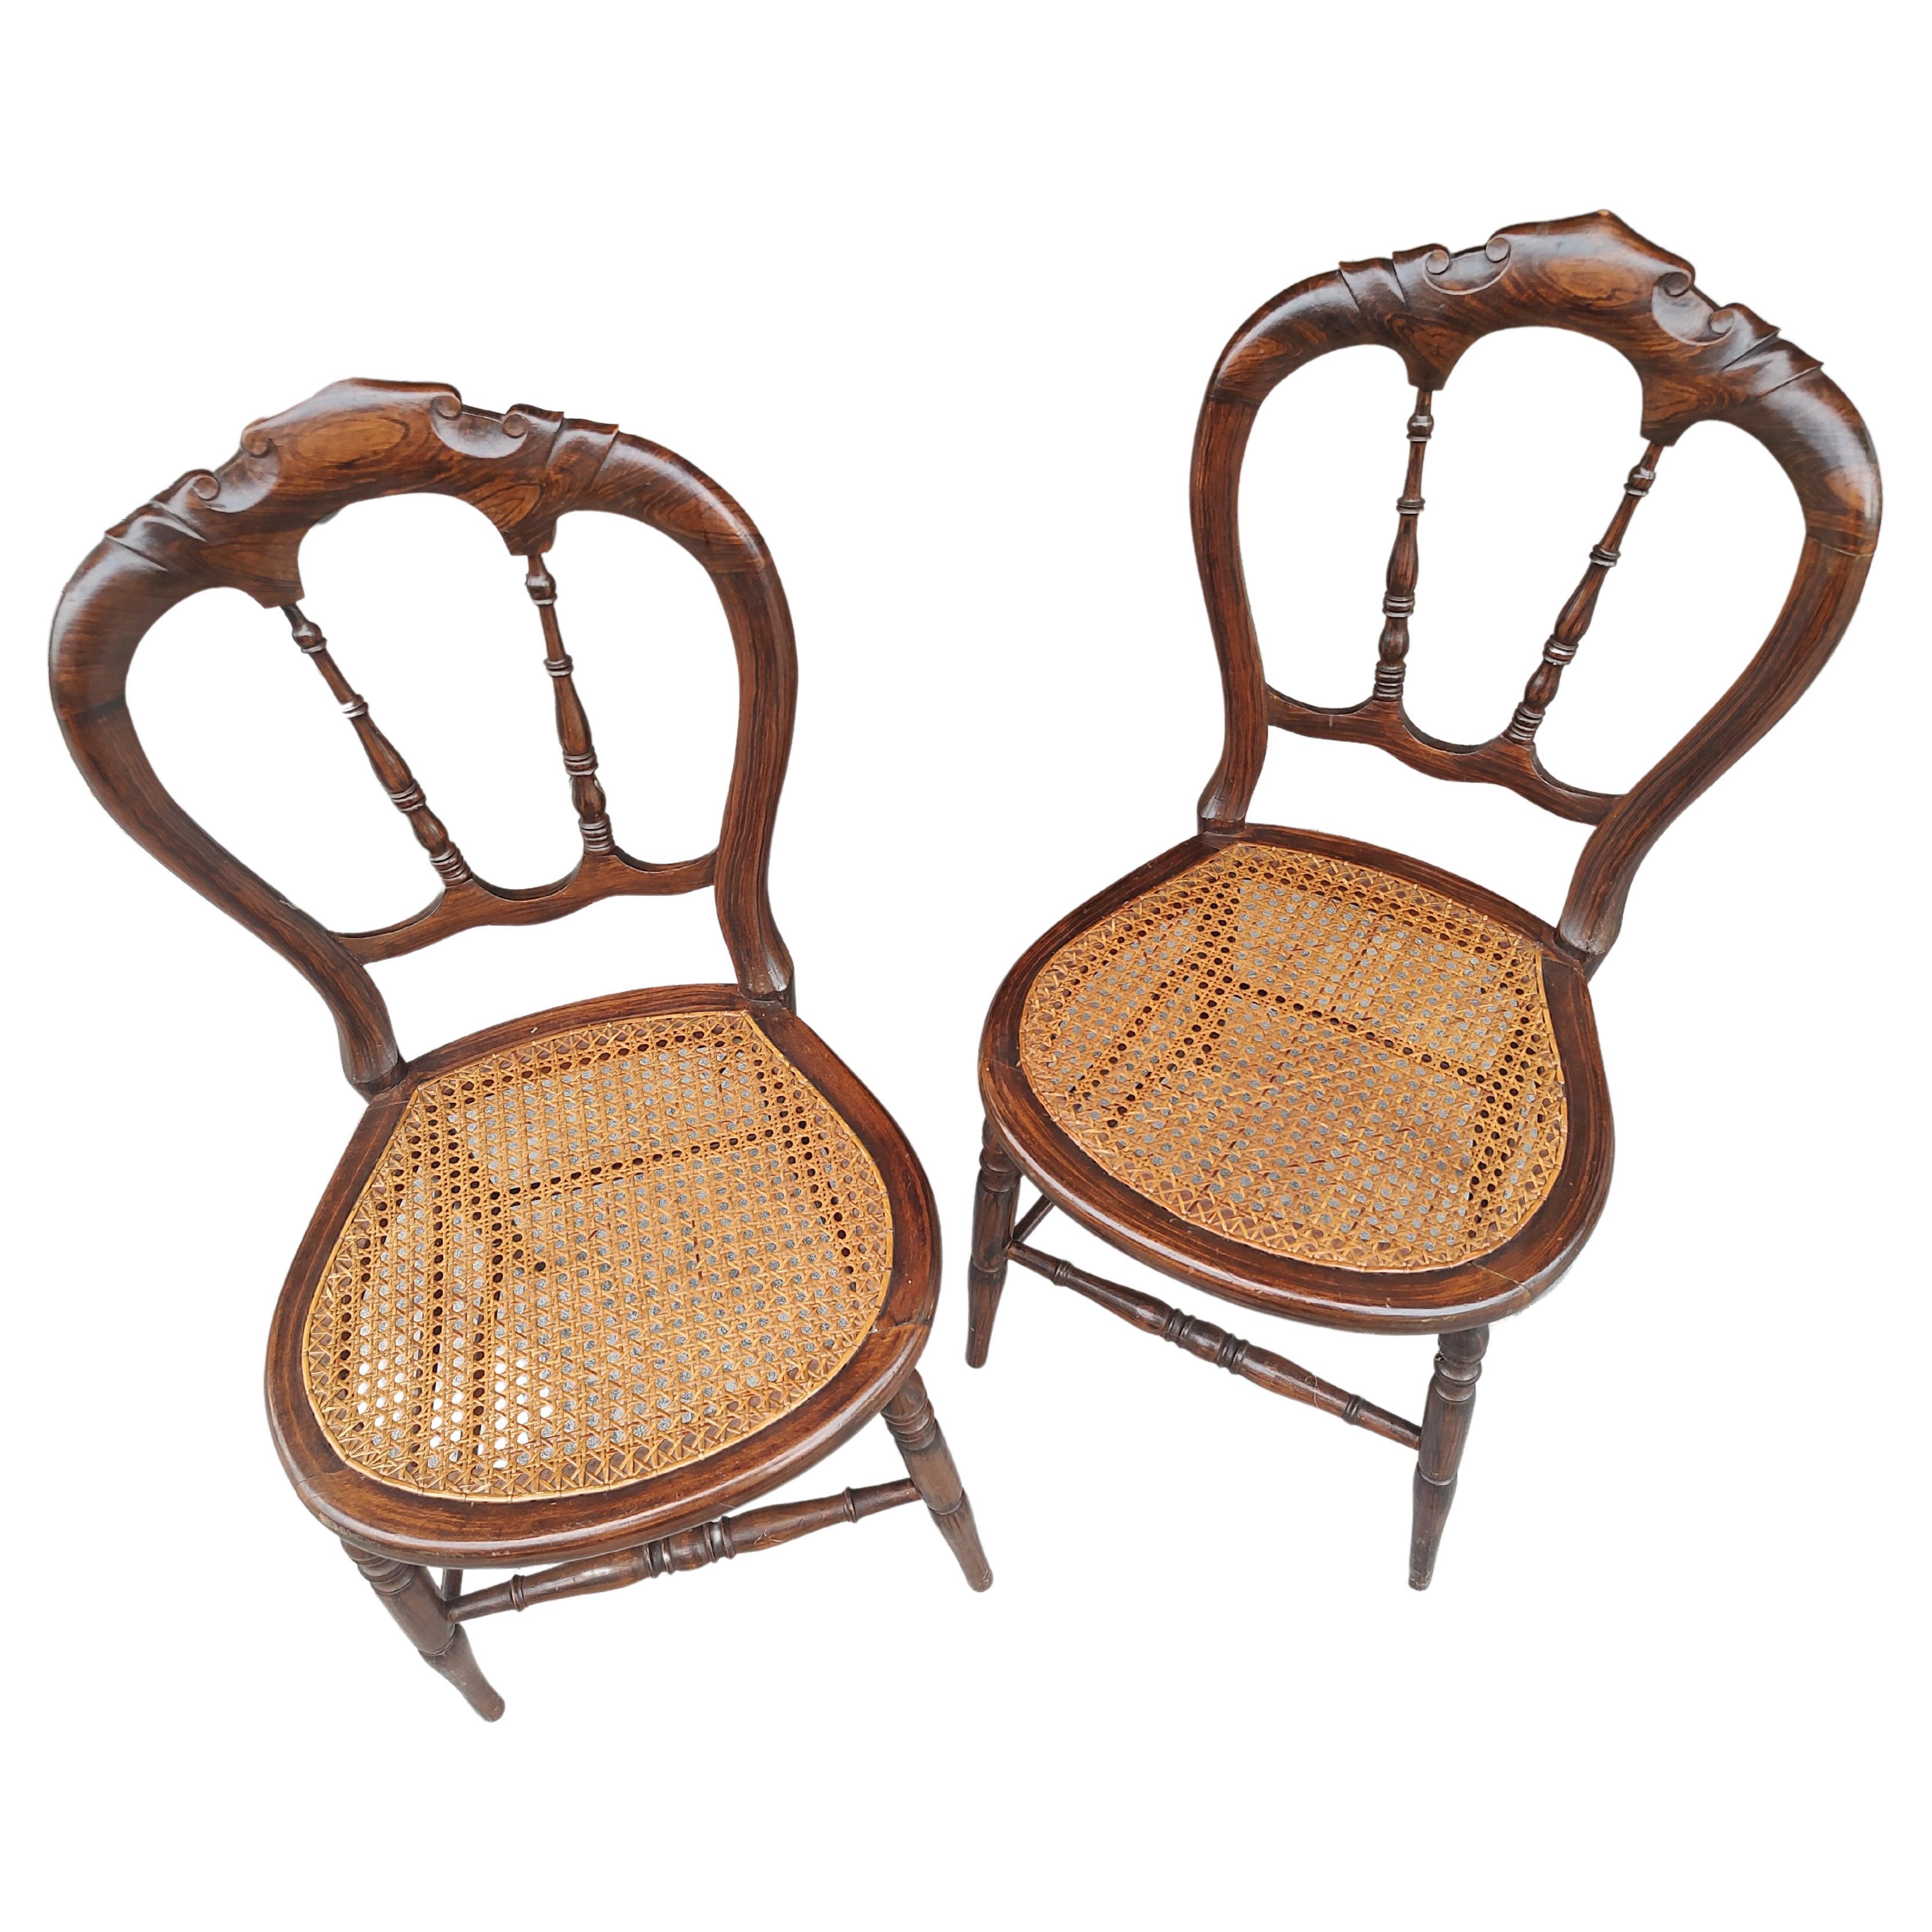 Gothic Revival Pair of Mid-19th Century Grain Painted Rosewood Chiavari Chairs with Caned Seats For Sale